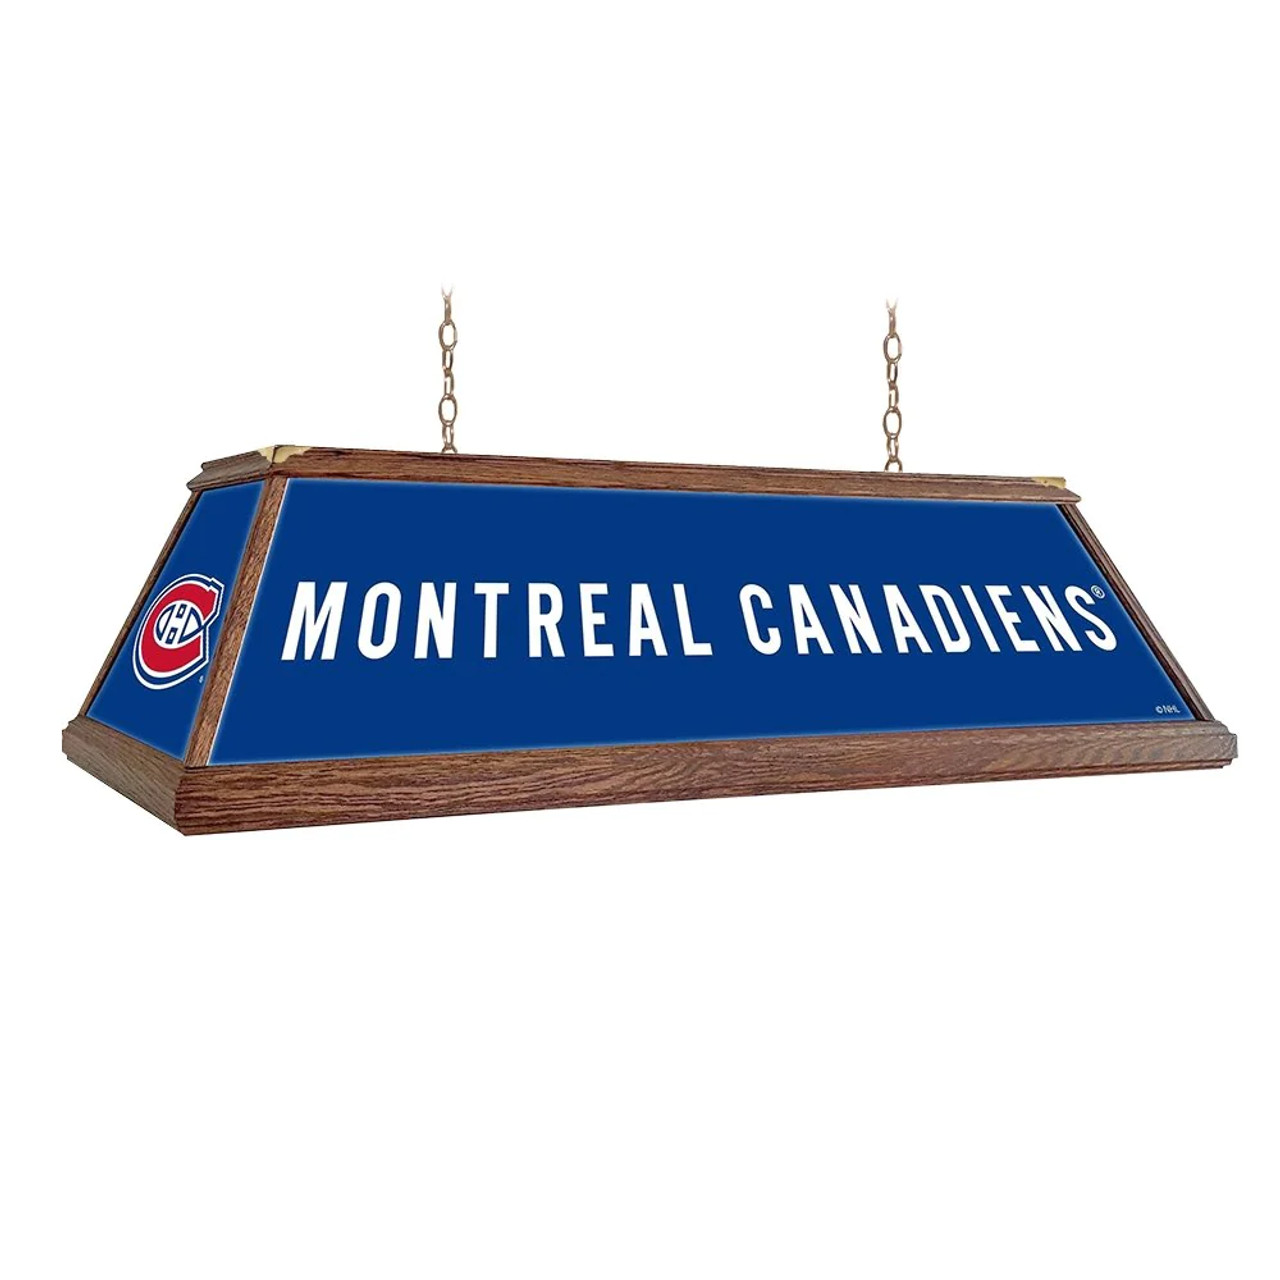 Montreal, Mon, Canadiens, Canadians, Premium Wood, 4-ft, Florescent, Wooden, Pool, Billiard, Table, Light, lamp, NHL, The Fan-Brand, 686082113694